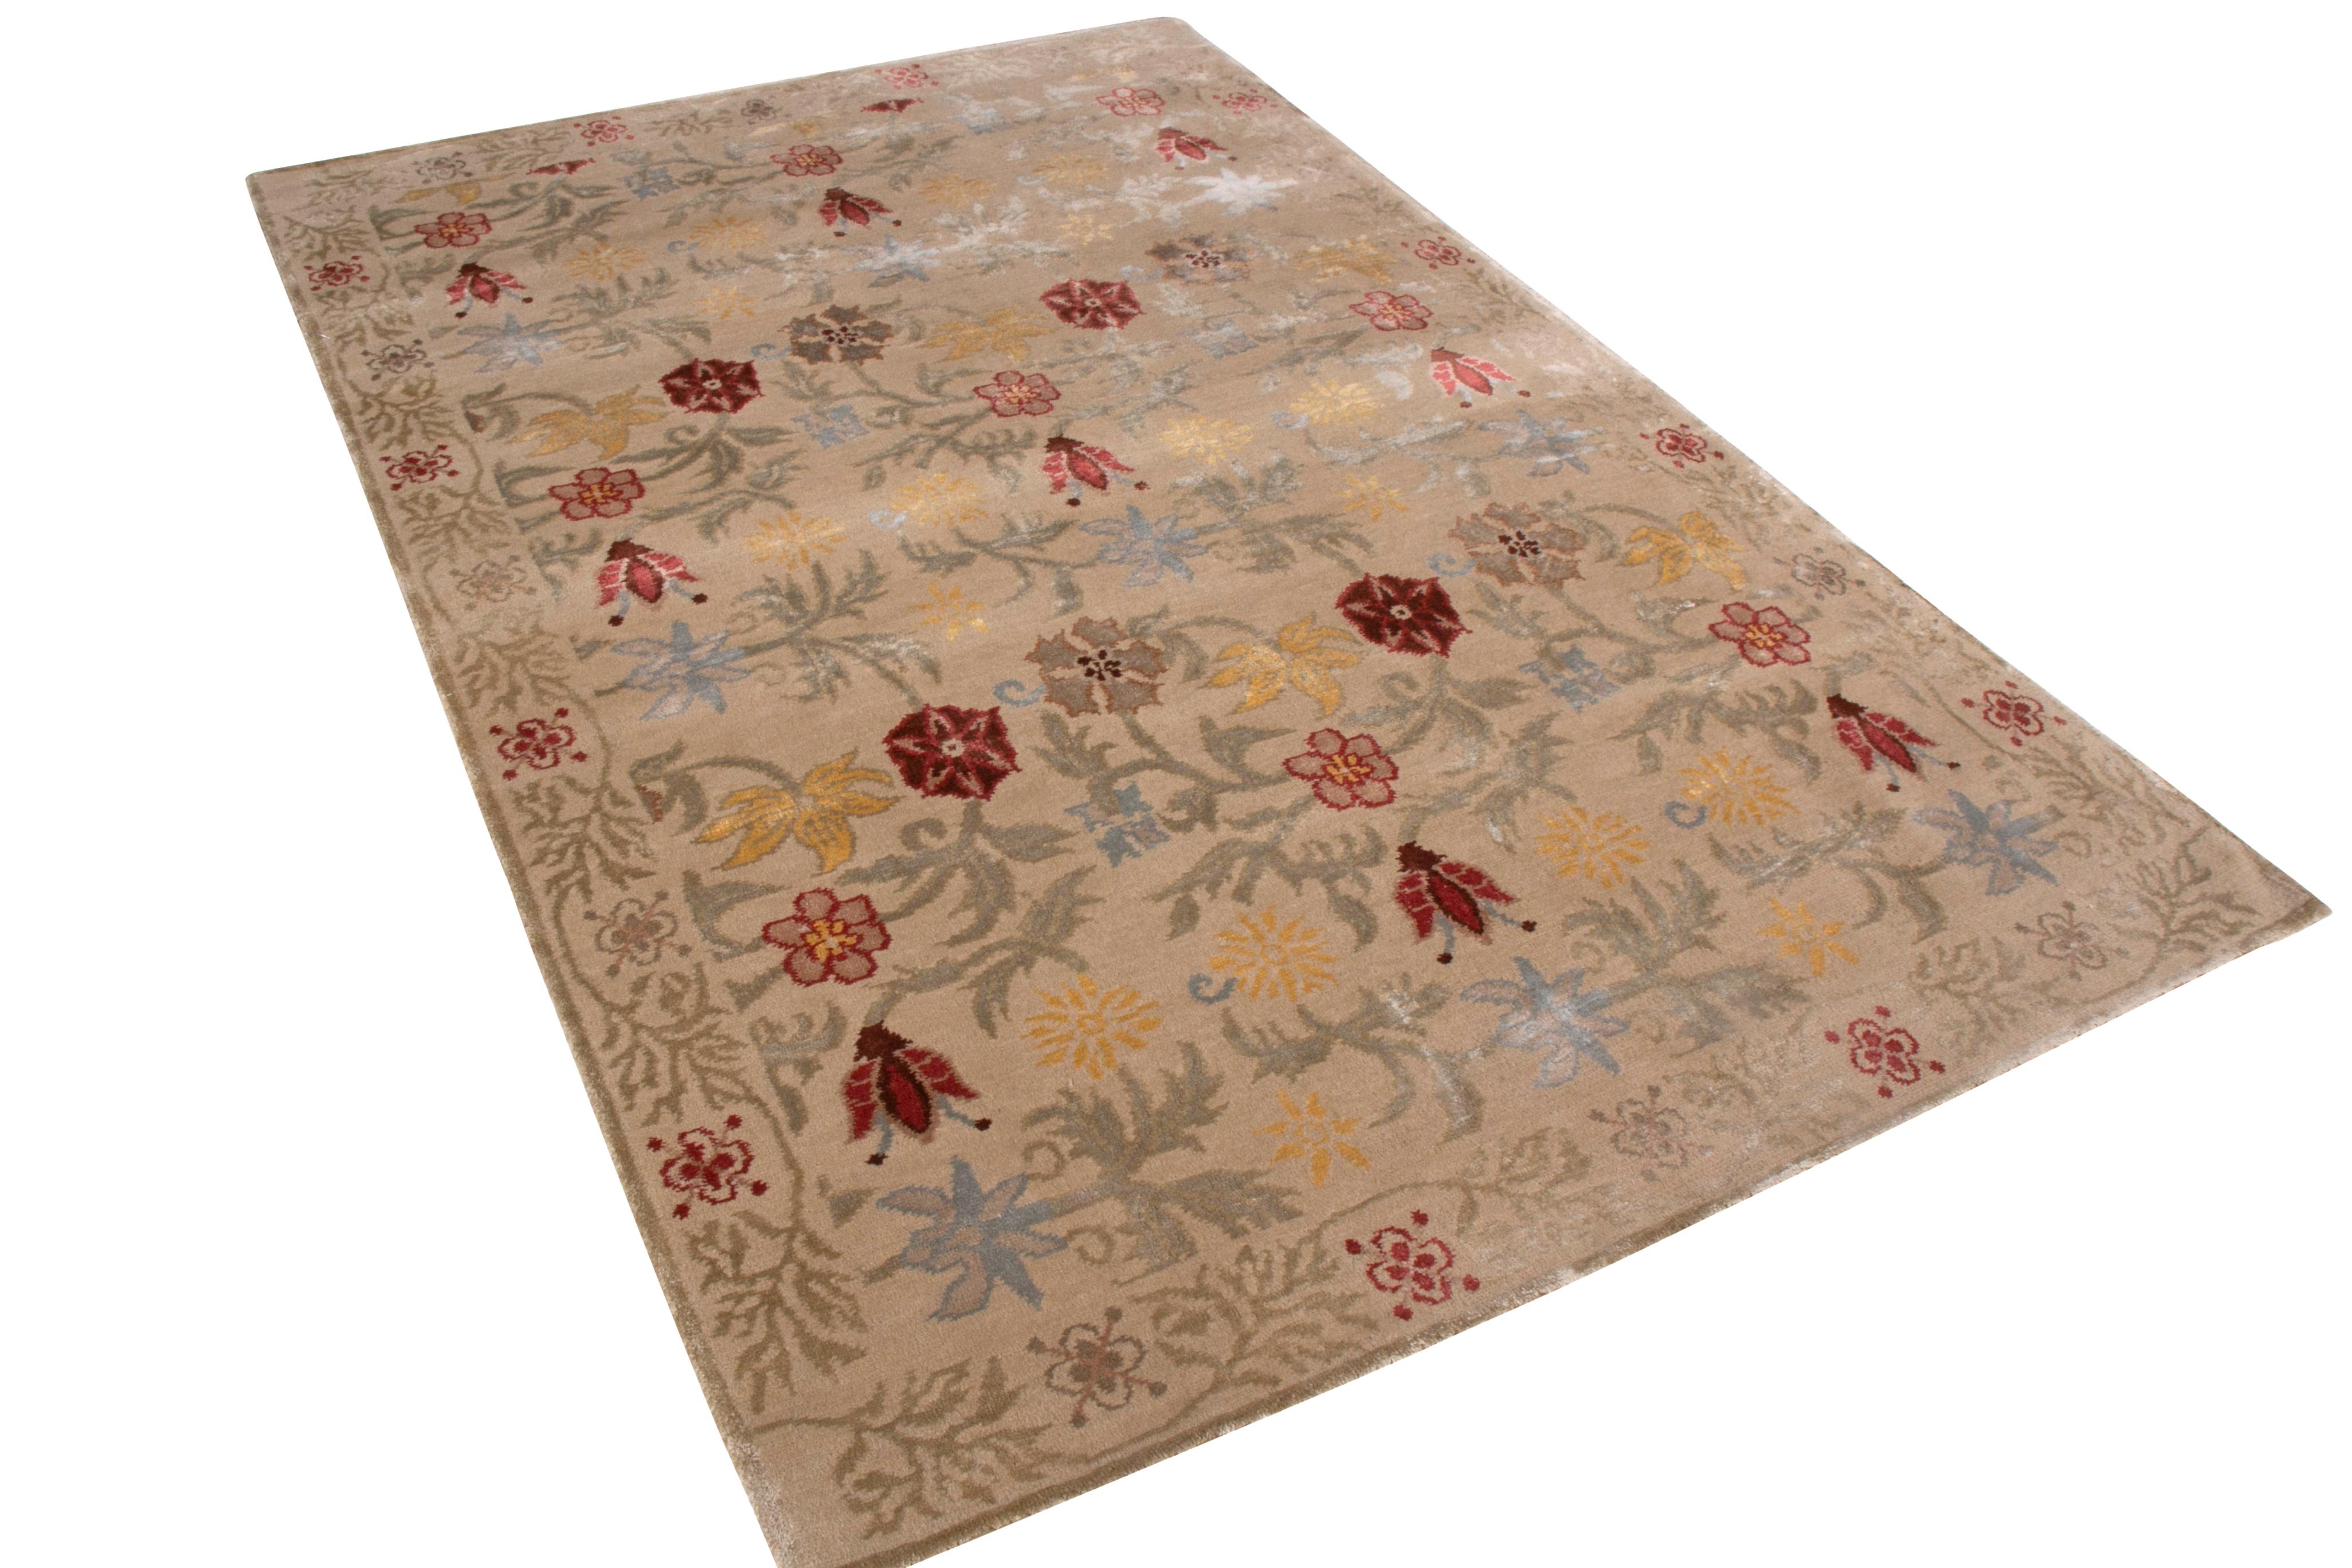 This 4 x 6 rug joins the European collection by Rug & Kilim-drawing inspiration from a traditional Spanish floral pattern affectionately dubbed “Bilbao” among the recent additions to this line. Hand knotted with a blend of quality wool and silk, the